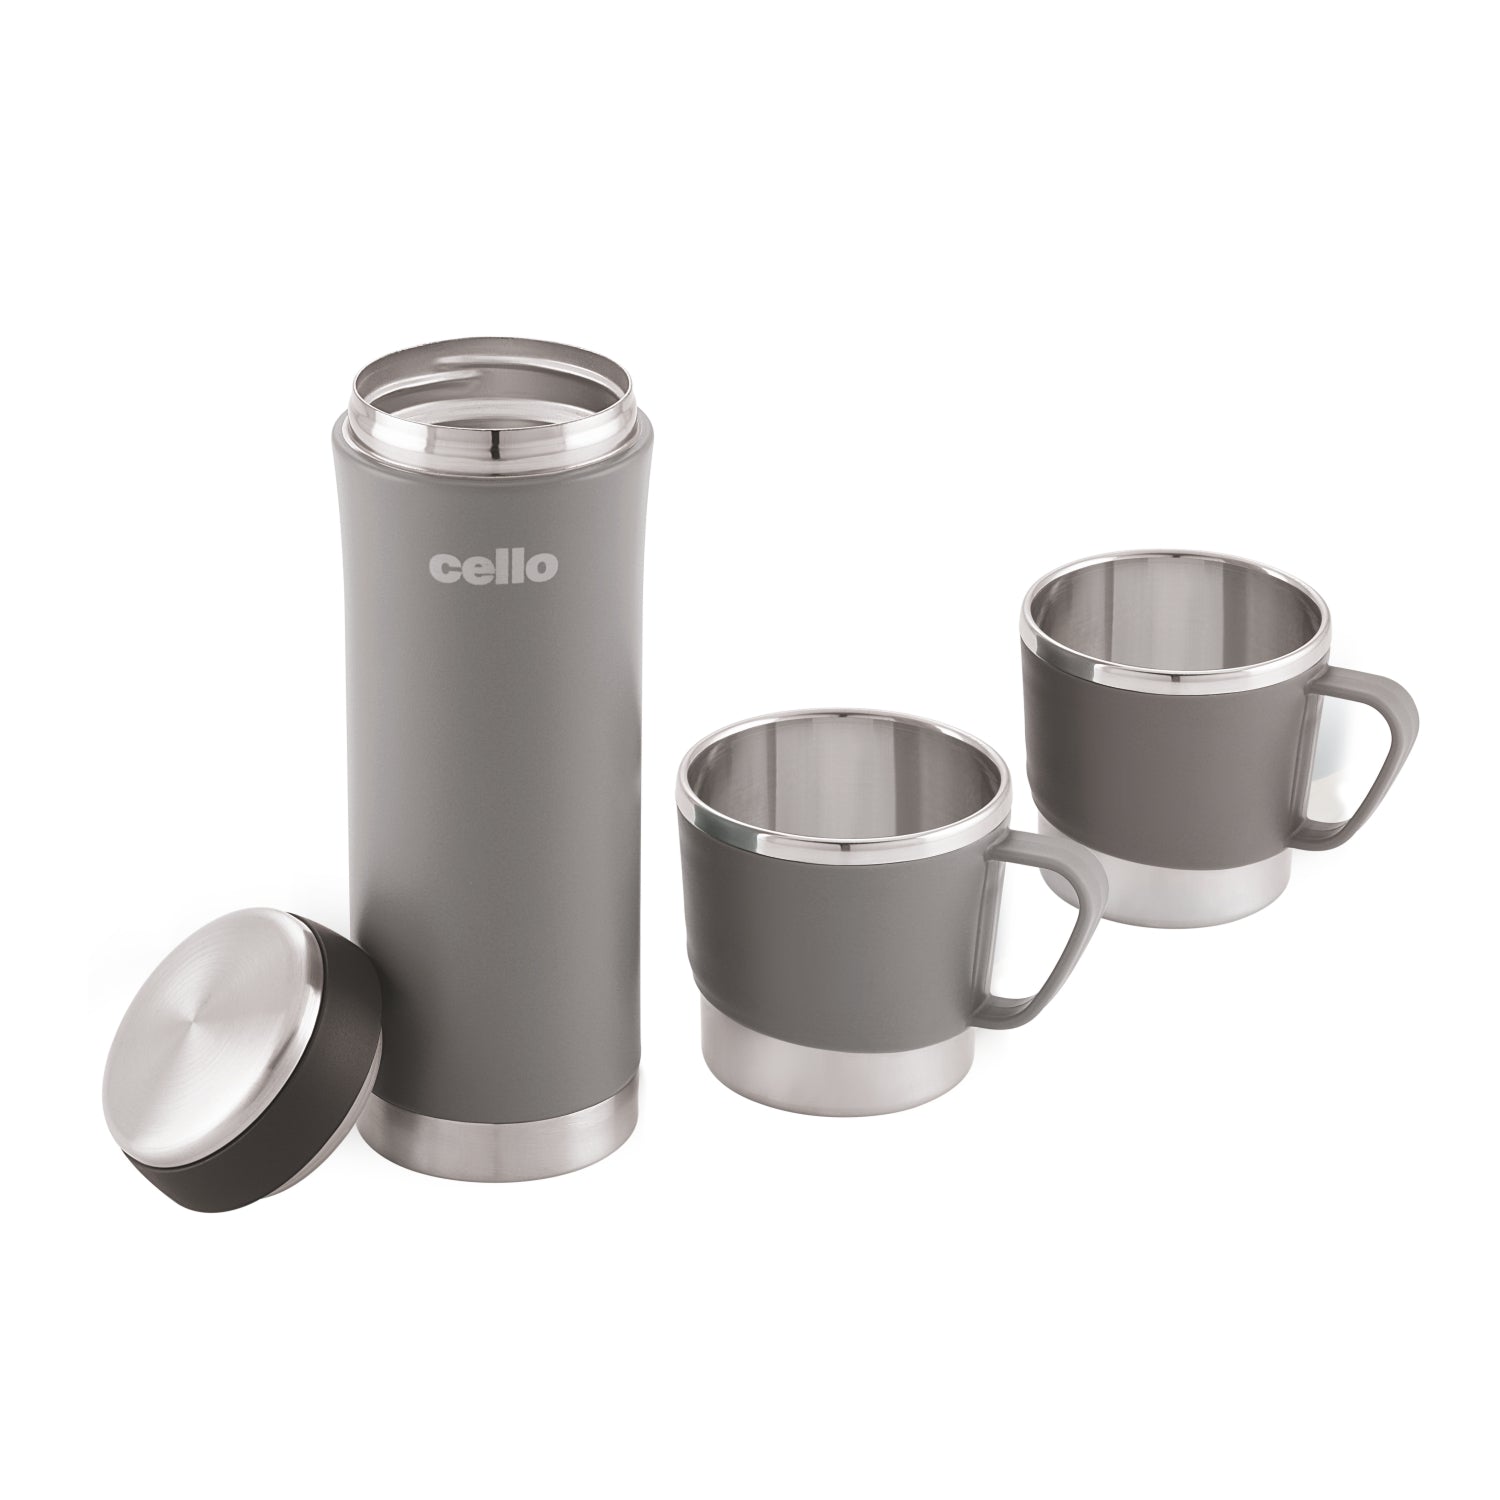 My Cup Vacusteel Flask with Mugs Gift Set, 3 Pieces Grey / 3 Pieces